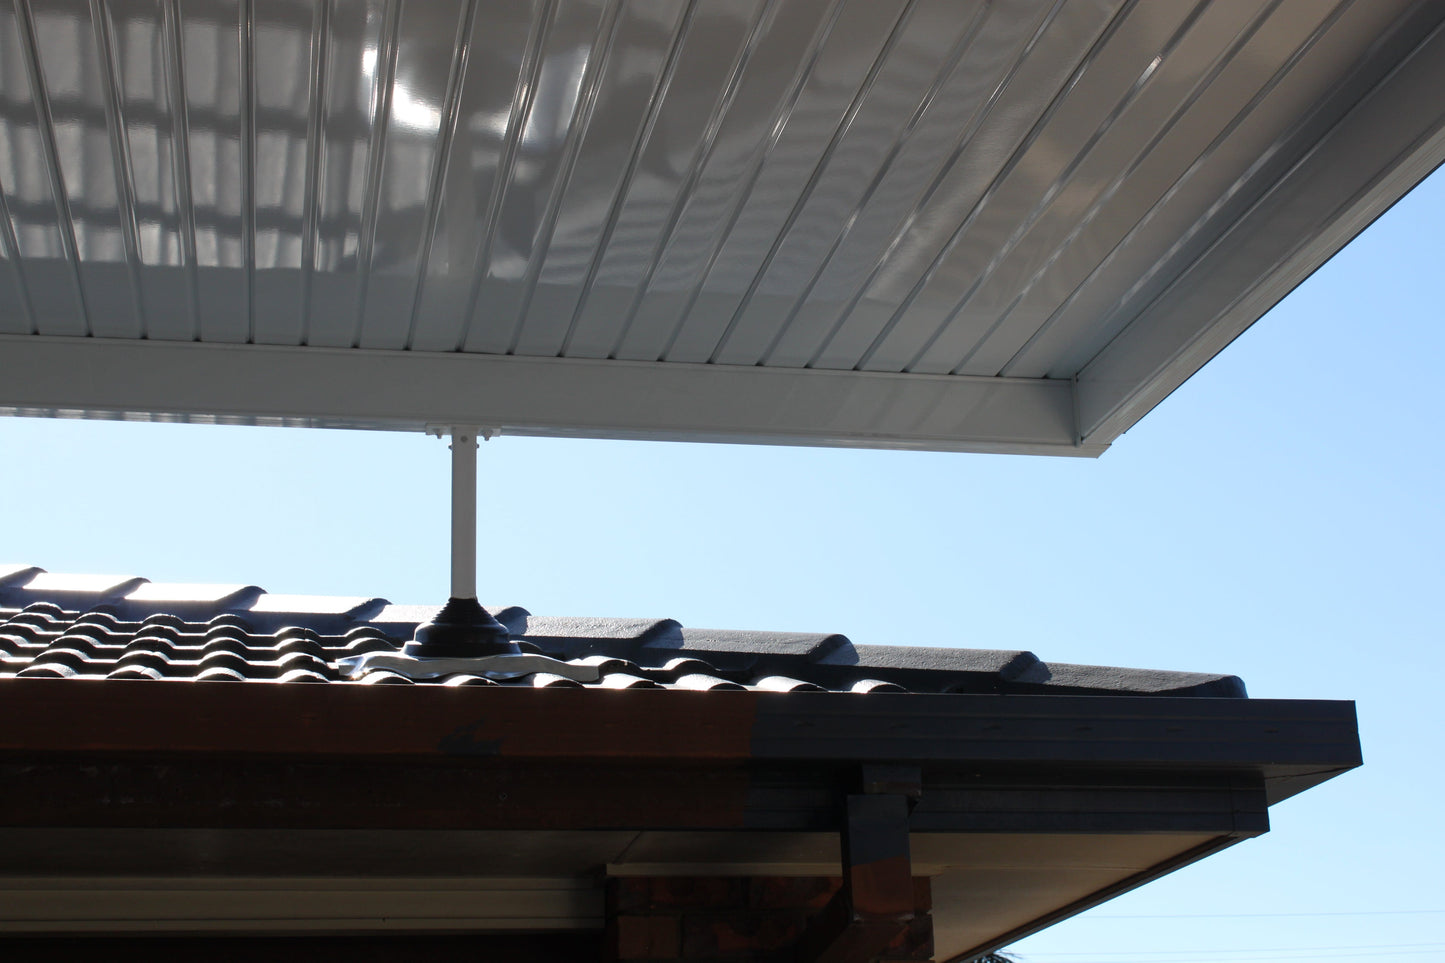 Insulated Flyover Patio Roof- 4m x 3m- Supply & Install QHI National